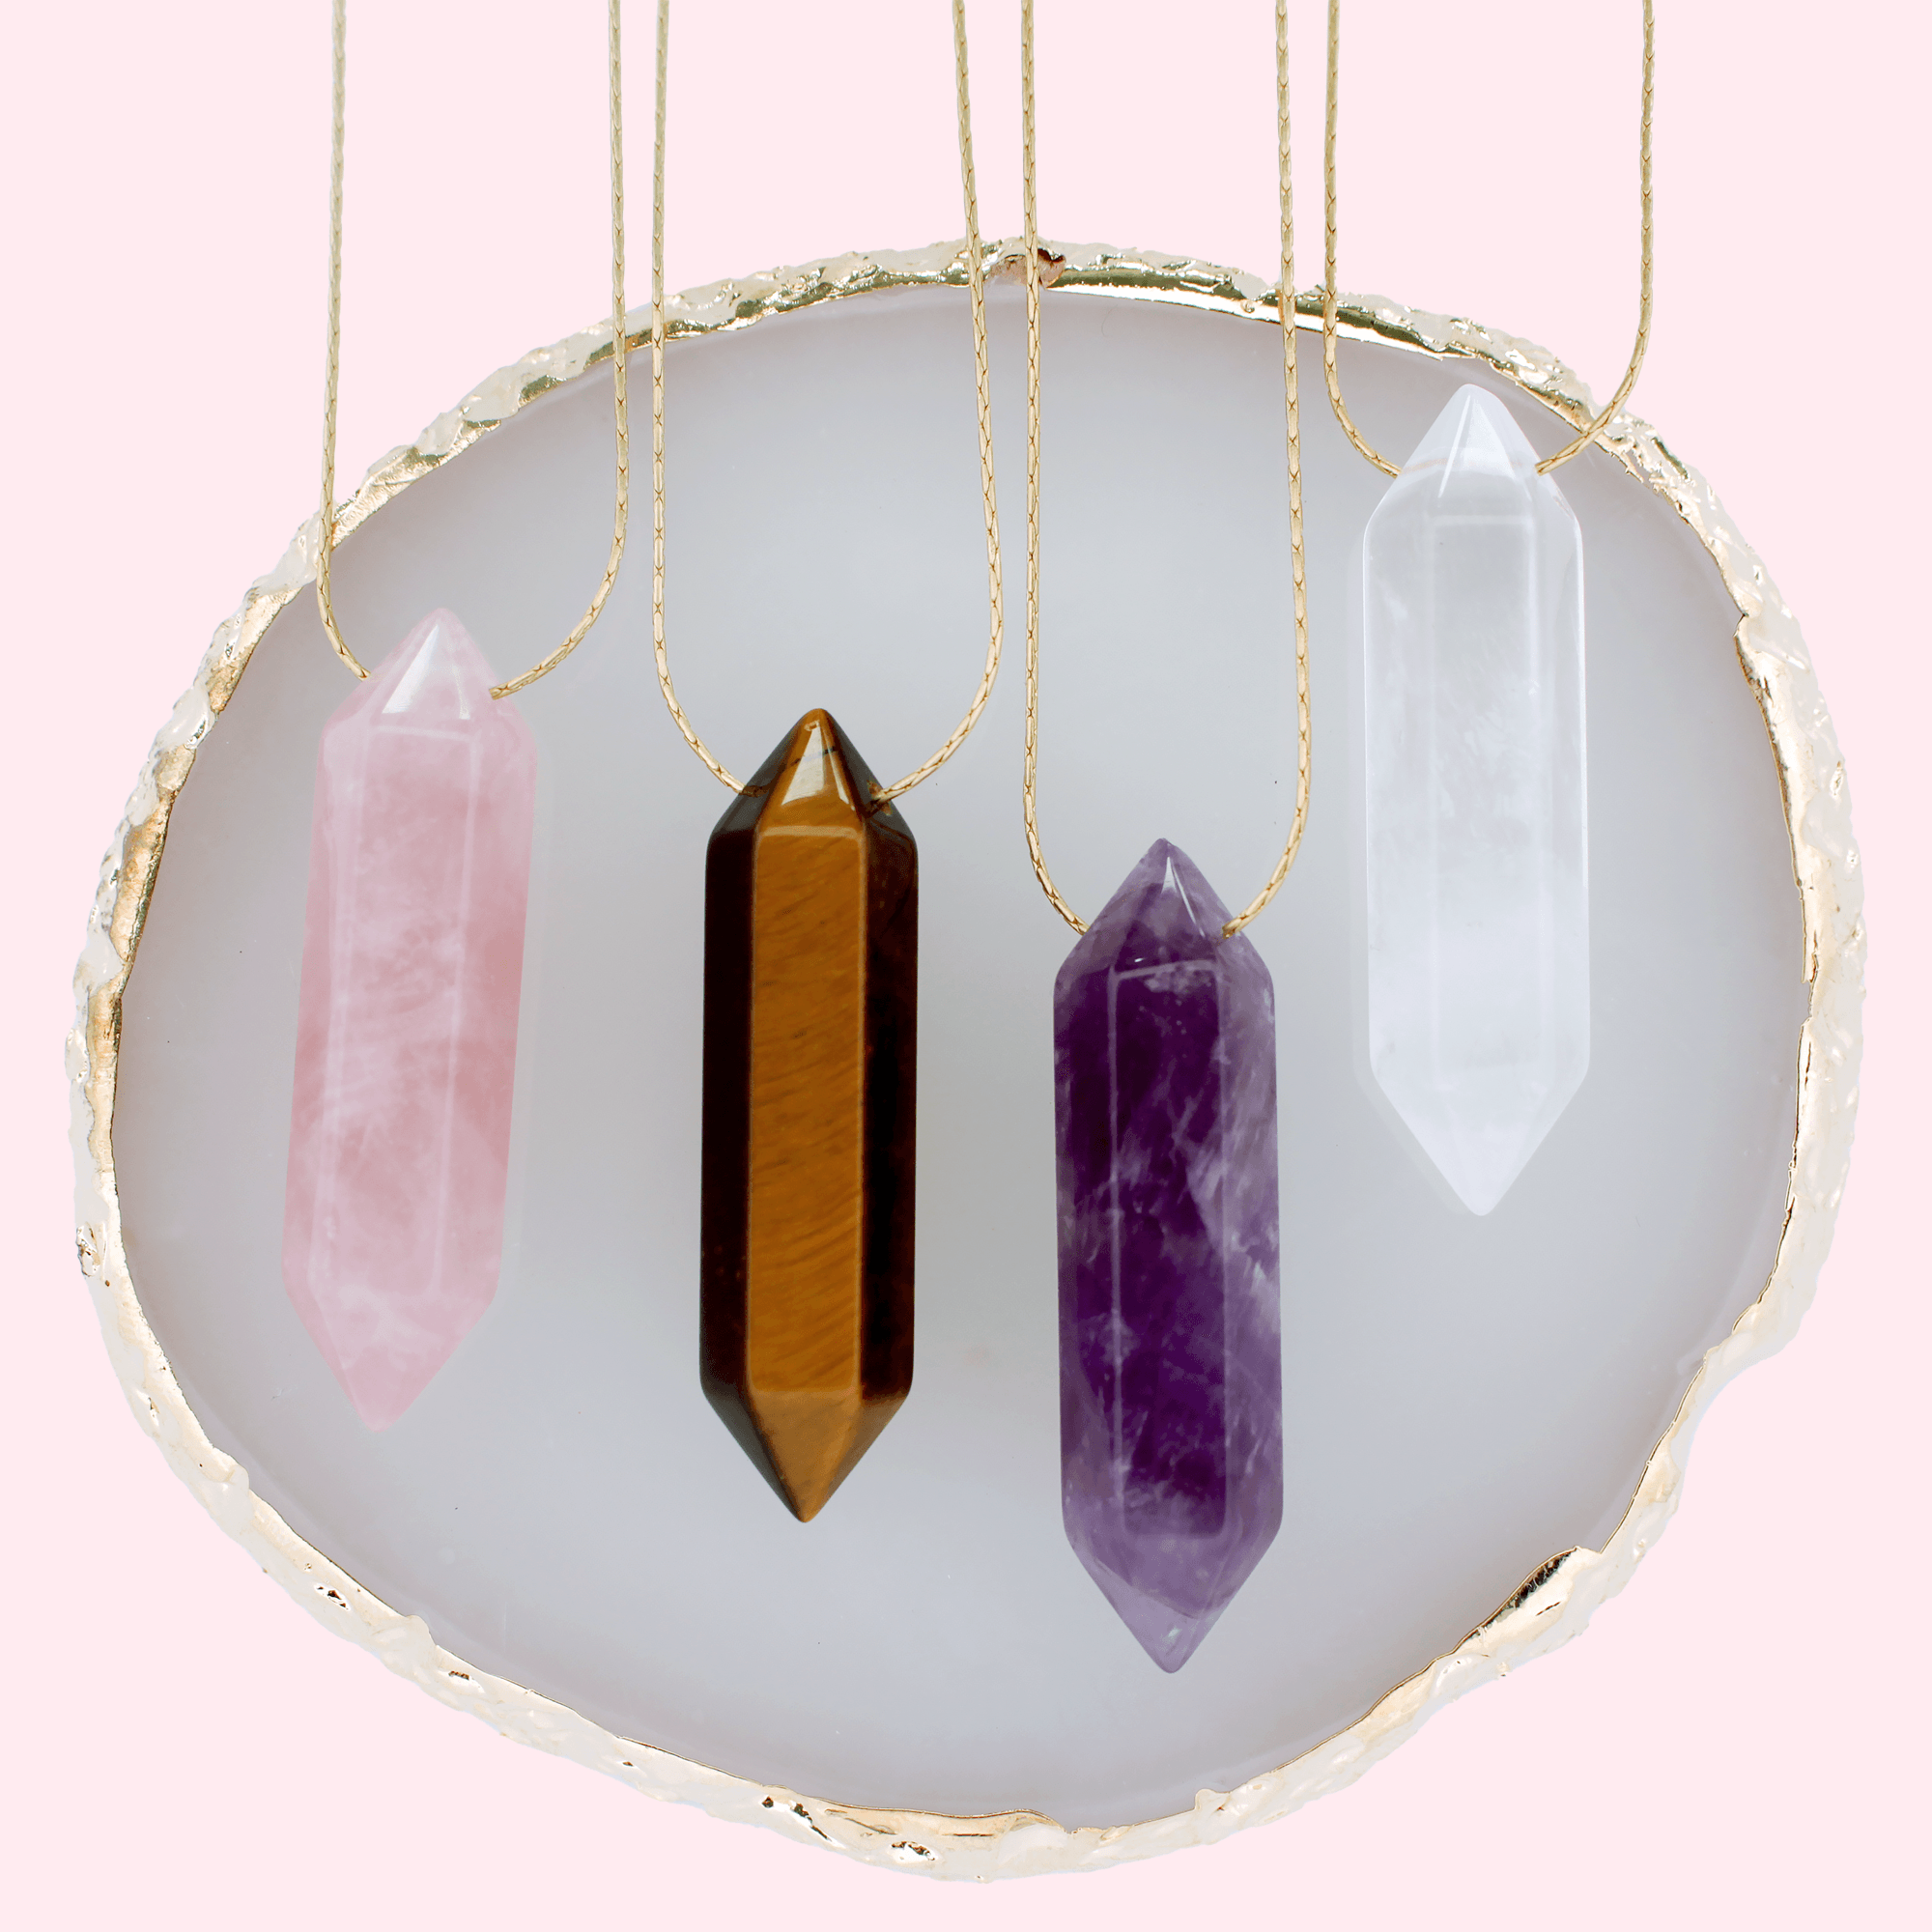 Buy TUMBEELLUWA Crystal Point Necklace Hexagonal Prism Stone Pendant with  Chain Healing Jewelry Pack of 2,Rock Quartz at Amazon.in